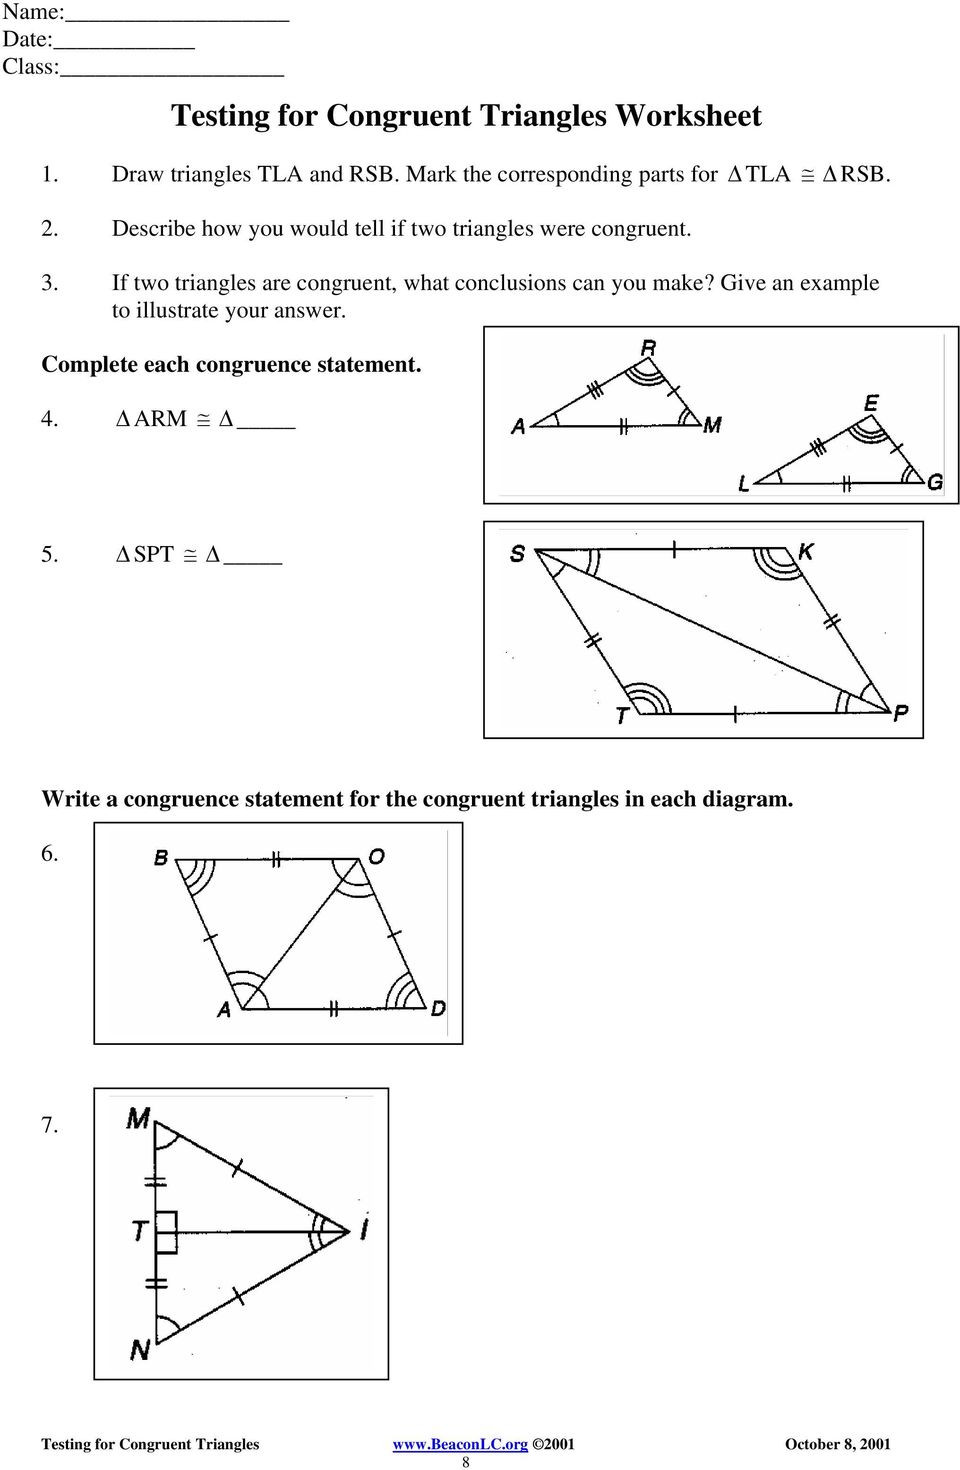 Congruent Triangles Worksheet Answers Testing for Congruent Triangles Examples Pdf Free Download